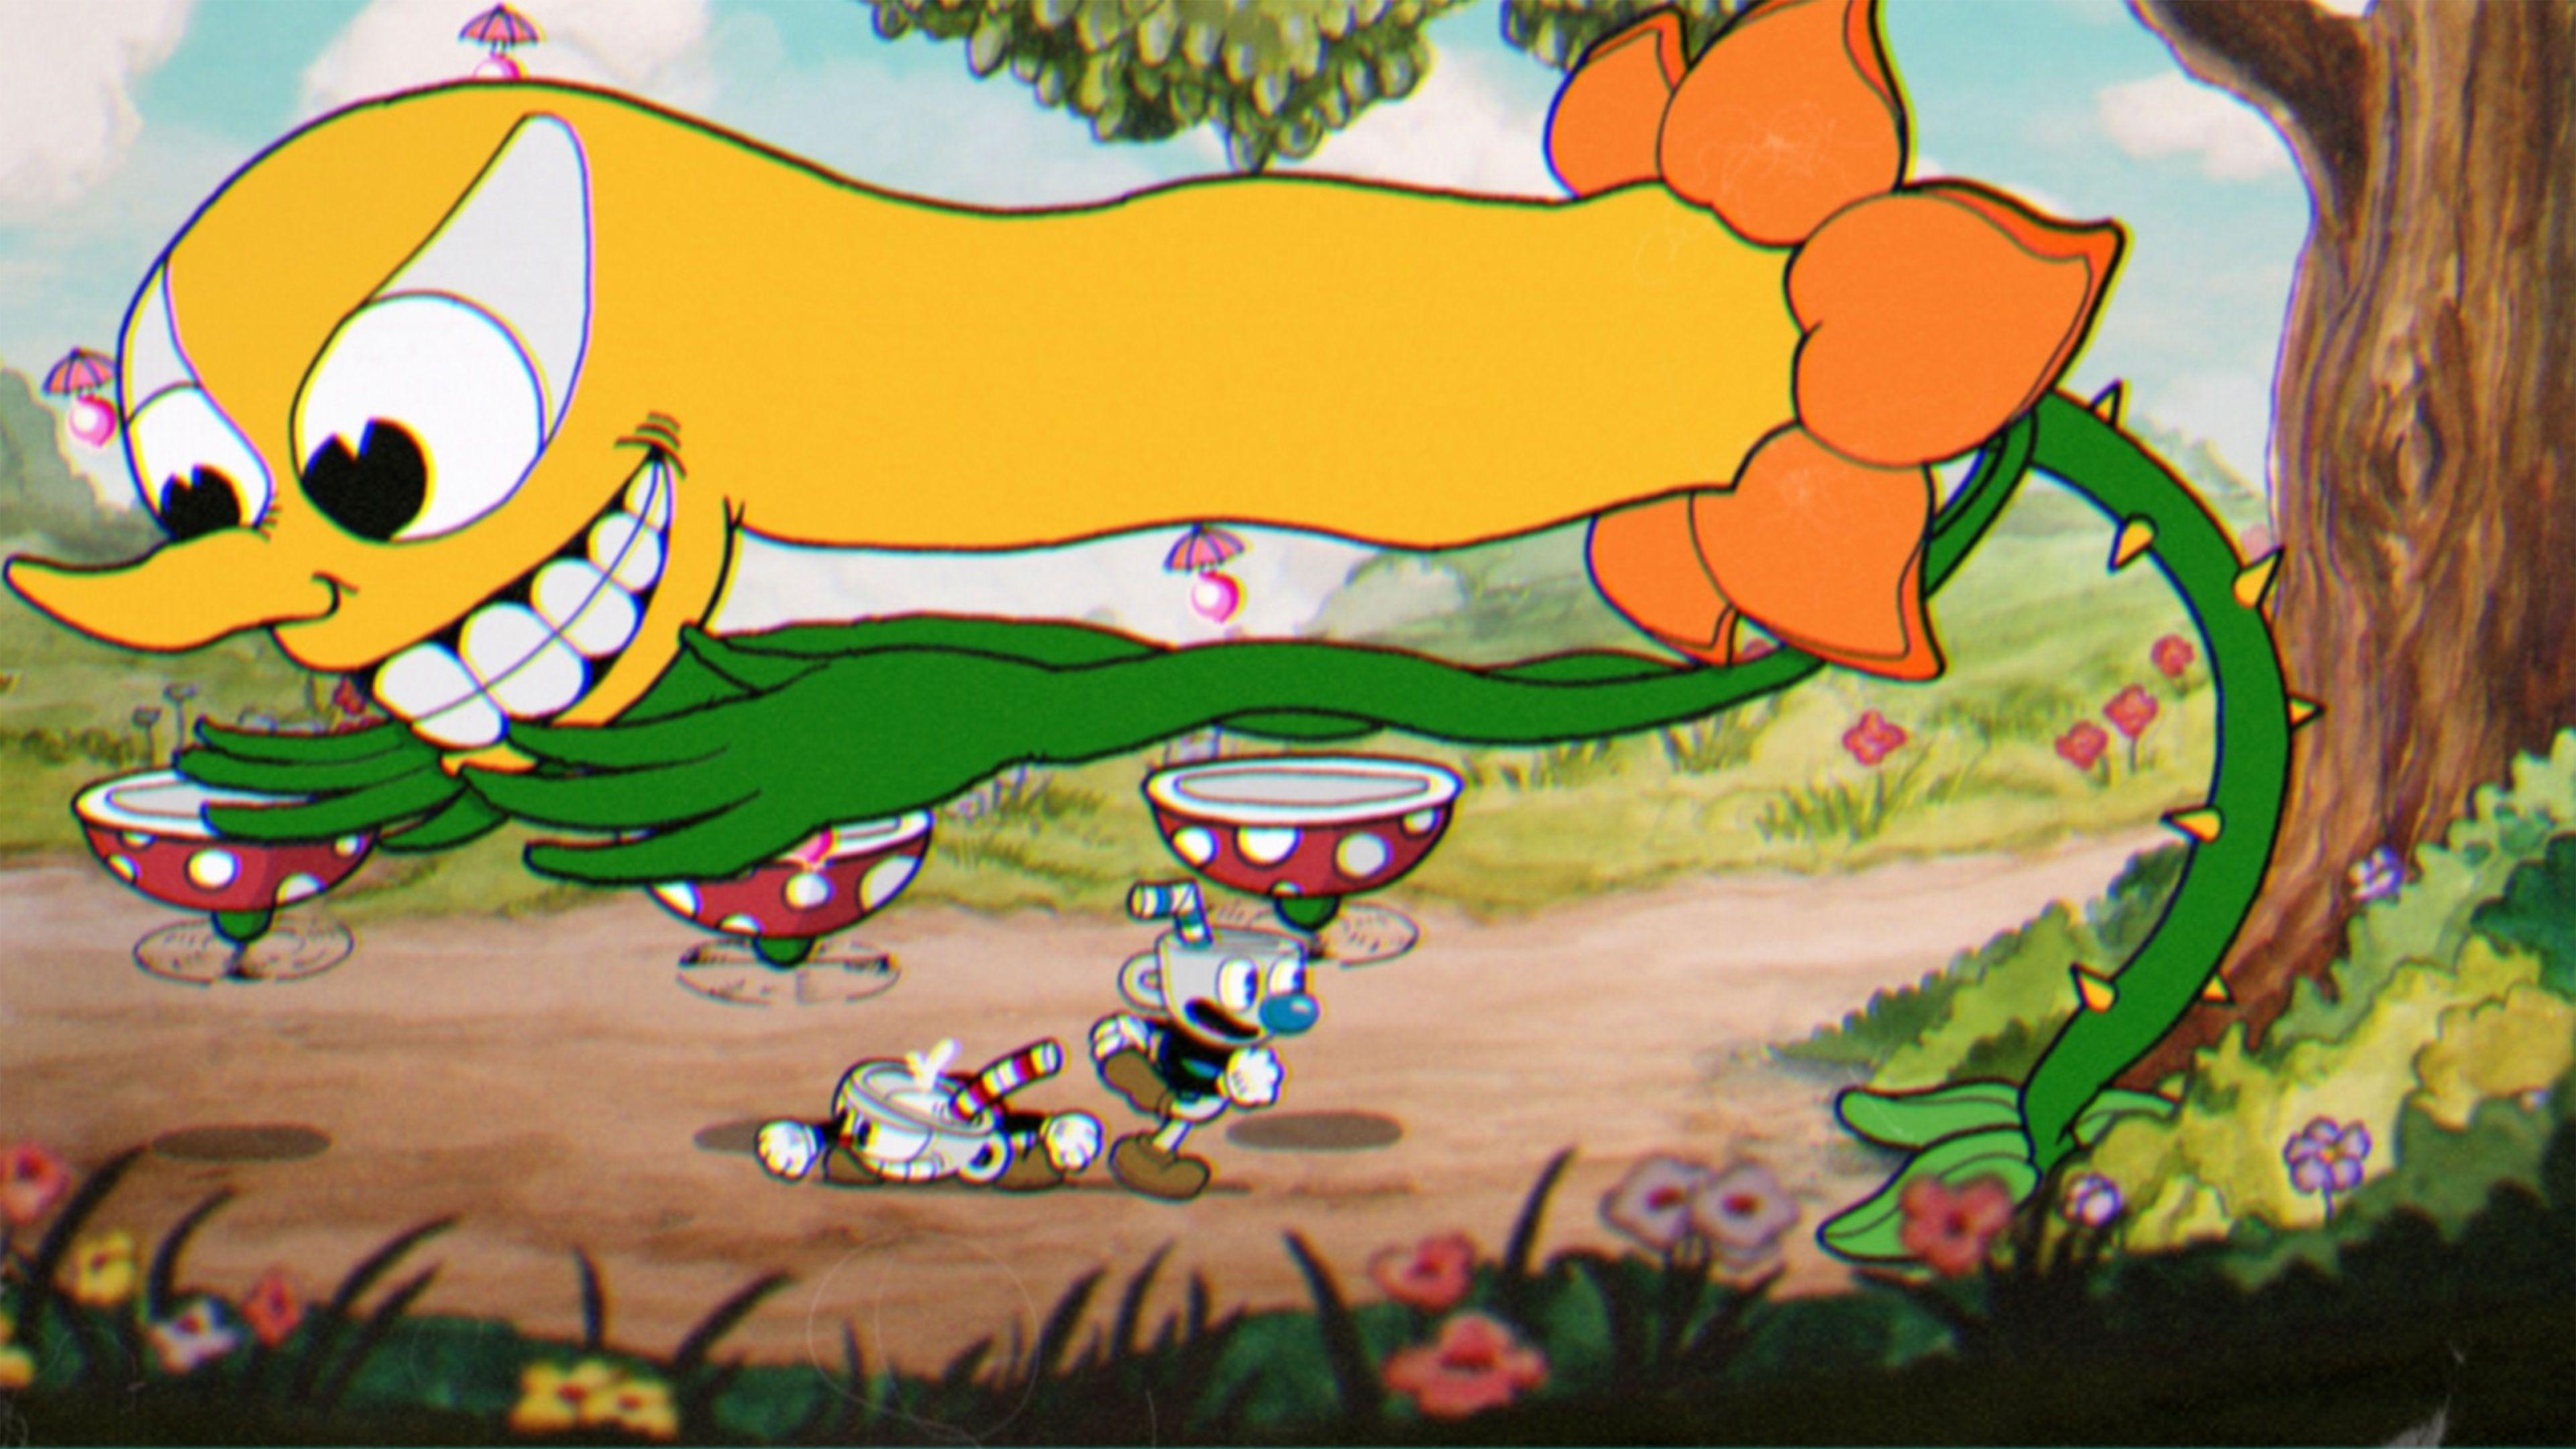 play cuphead game free online